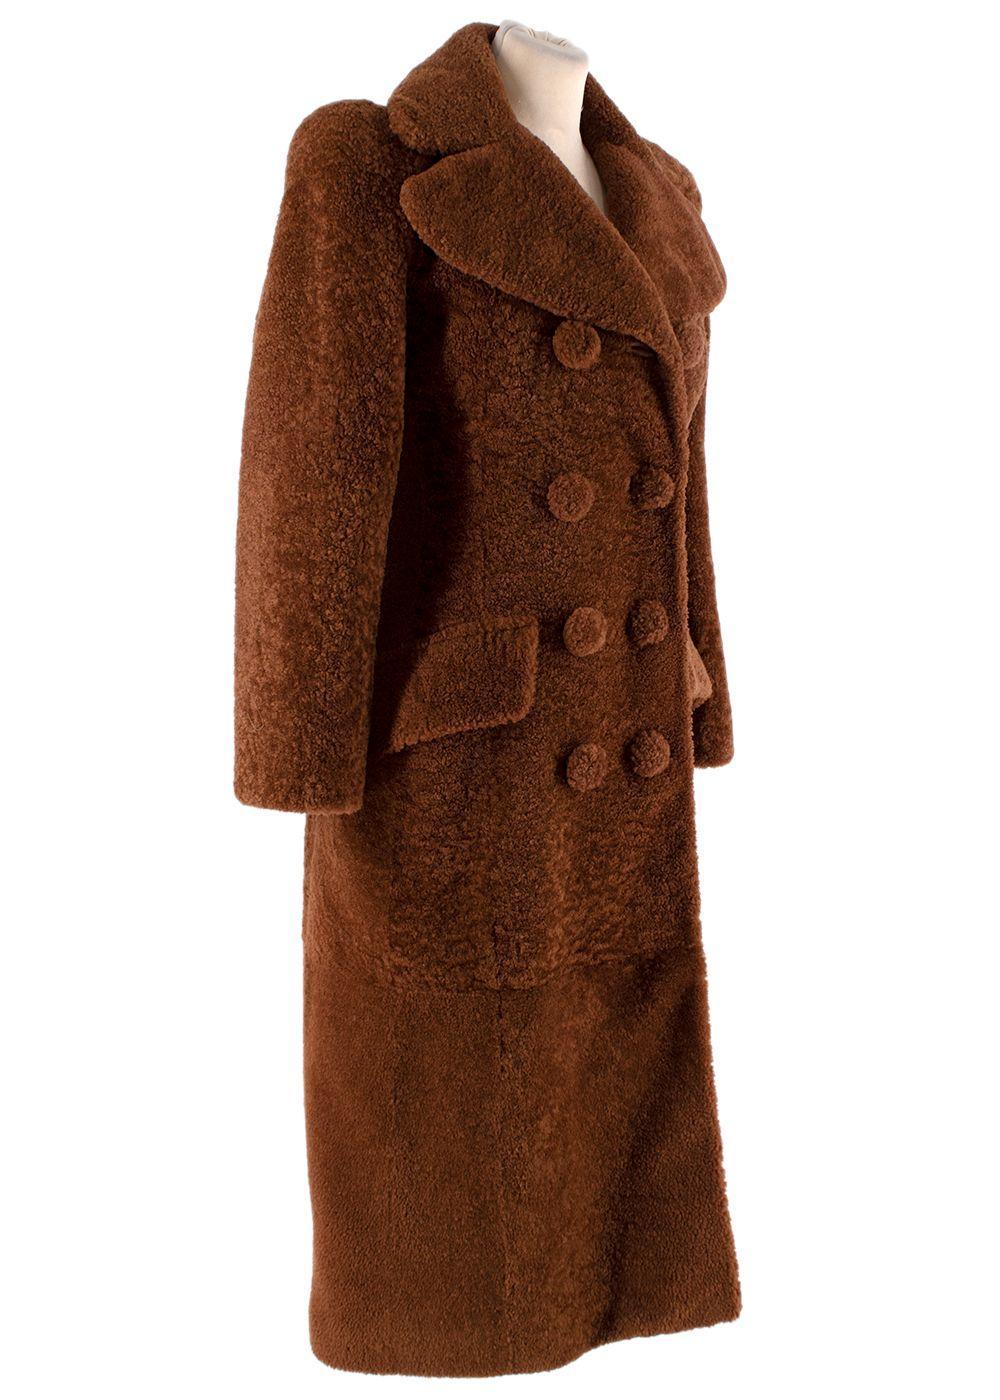 Bottega Veneta Cognac-brown Shearling Teddy Coat

- Longline, teddy-style coat in a rich cognac-brown hue
- Retro-inspired silhouette with exaggerated notched lapel, and double-breasted front
- Large, tonal buttons
- 2 flapped hip pockets
- Fully